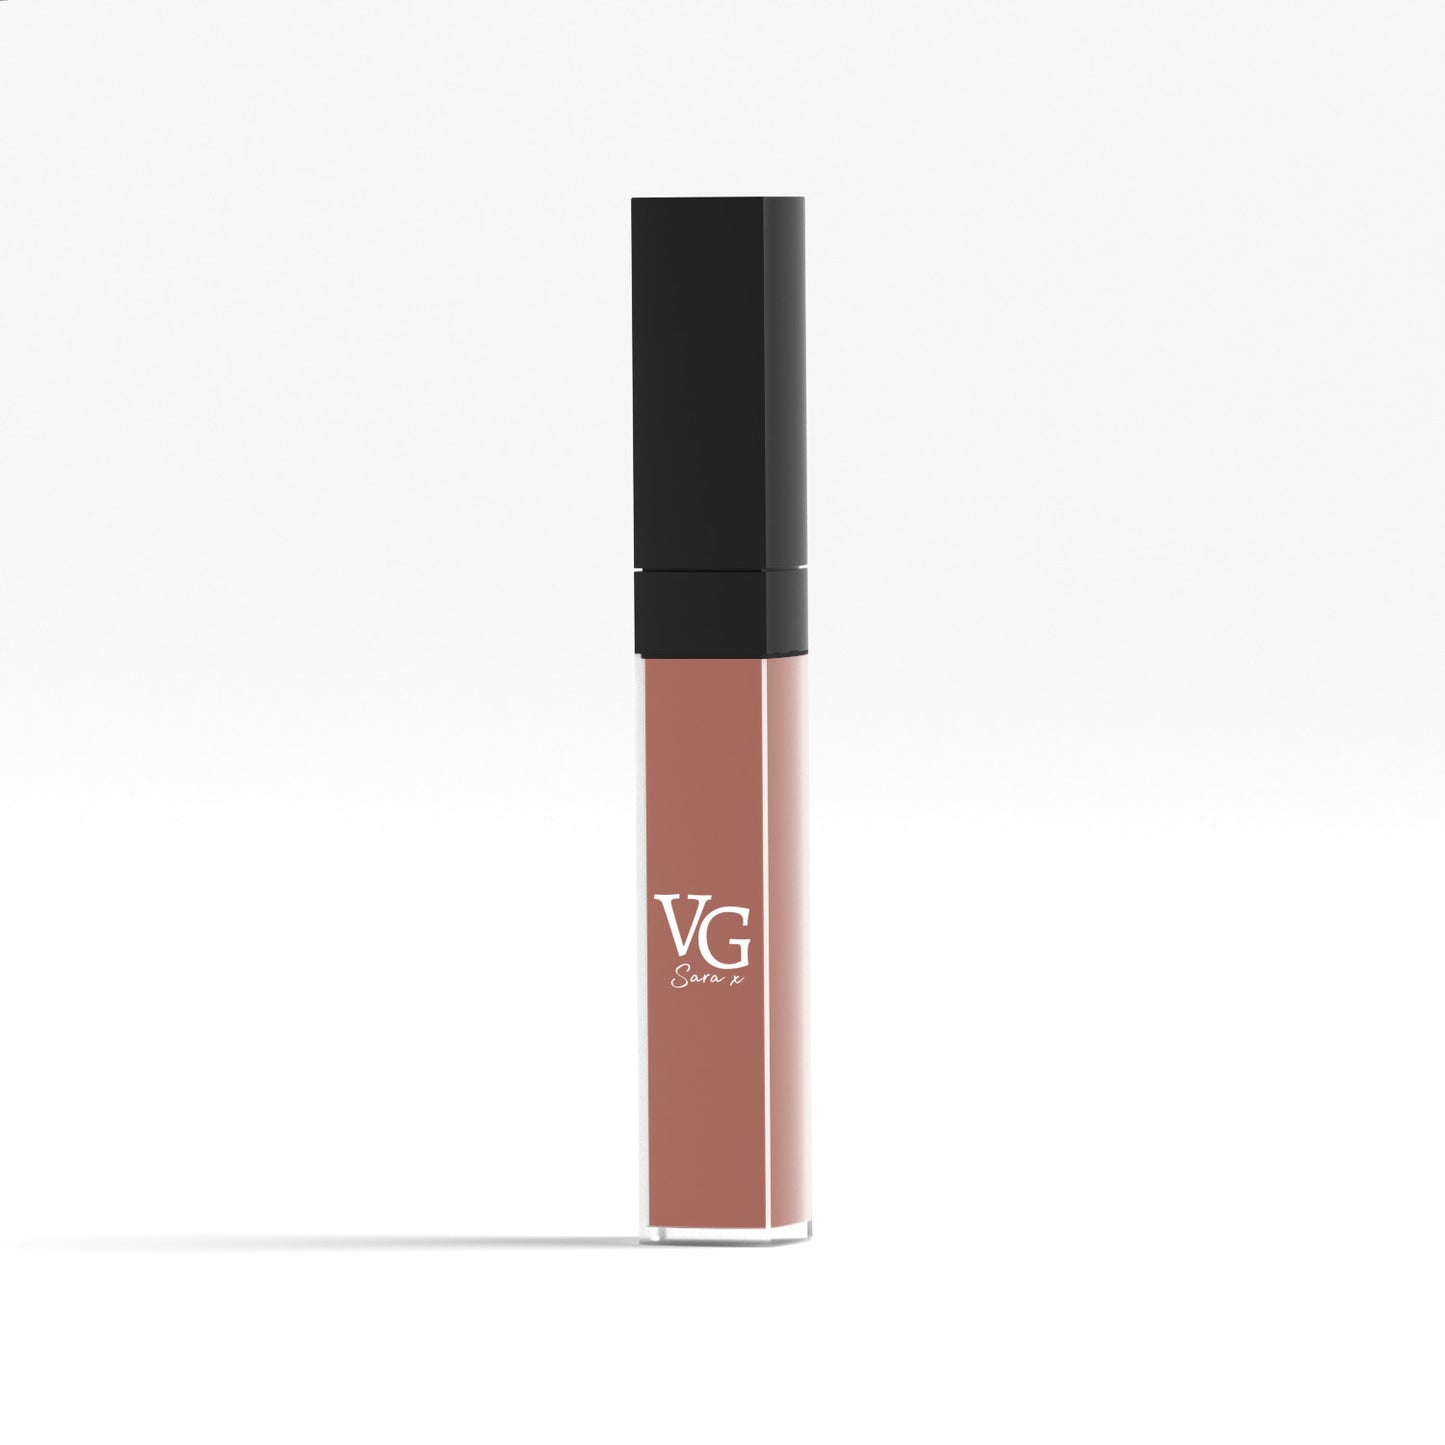 Light brown vegan lip gloss with clear label